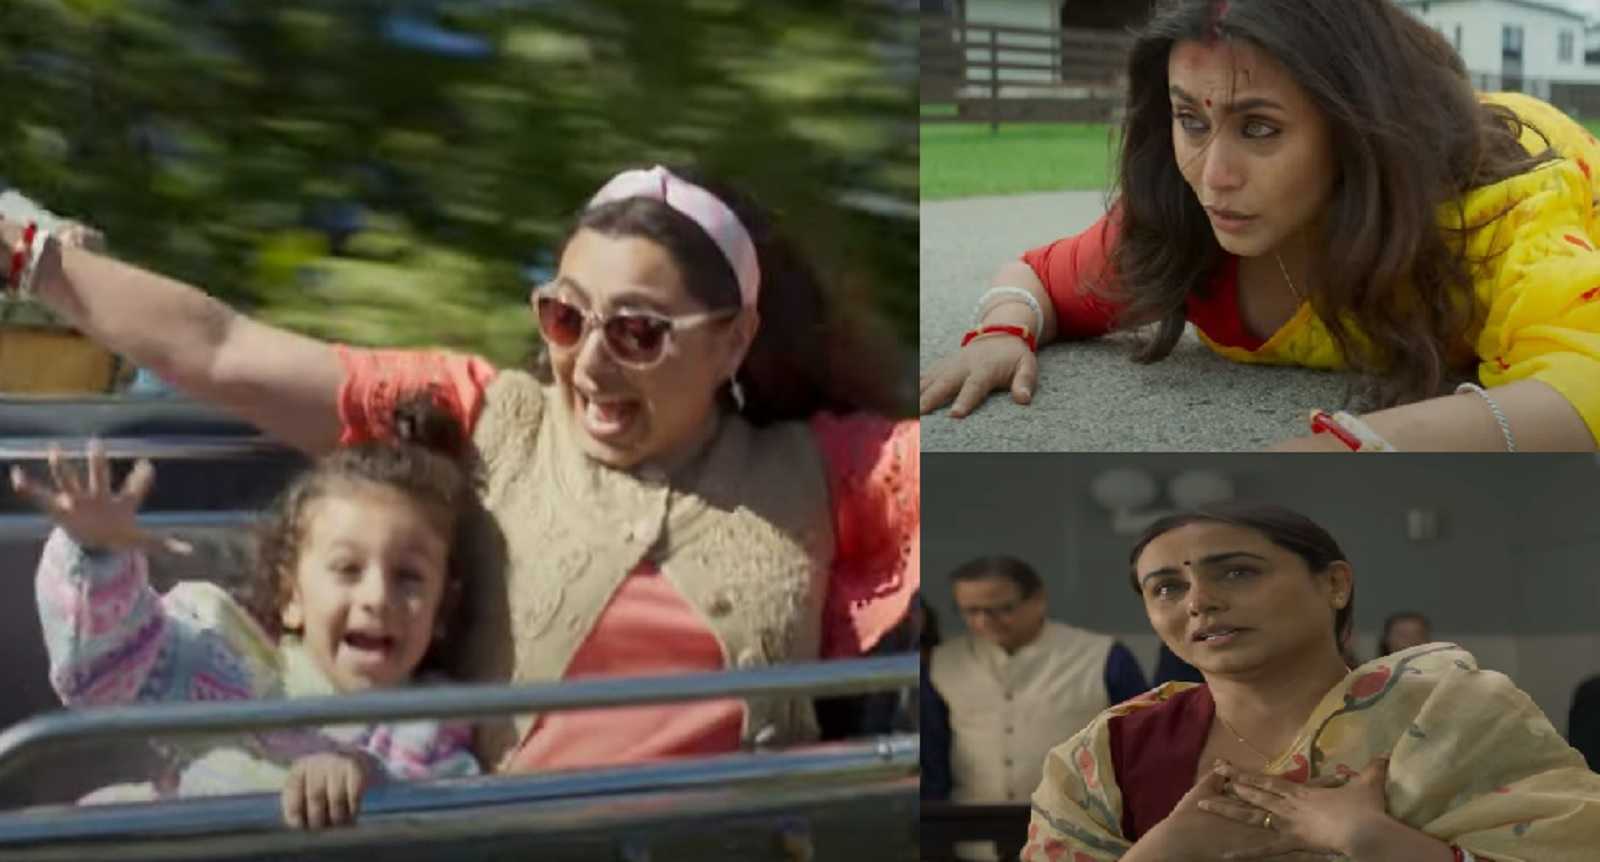 Mrs Chatterjee Vs Norway Trailer: Rani Mukerji as a mother battles faulty foster-care system in foreign land, fails to make impact with Bengali accent